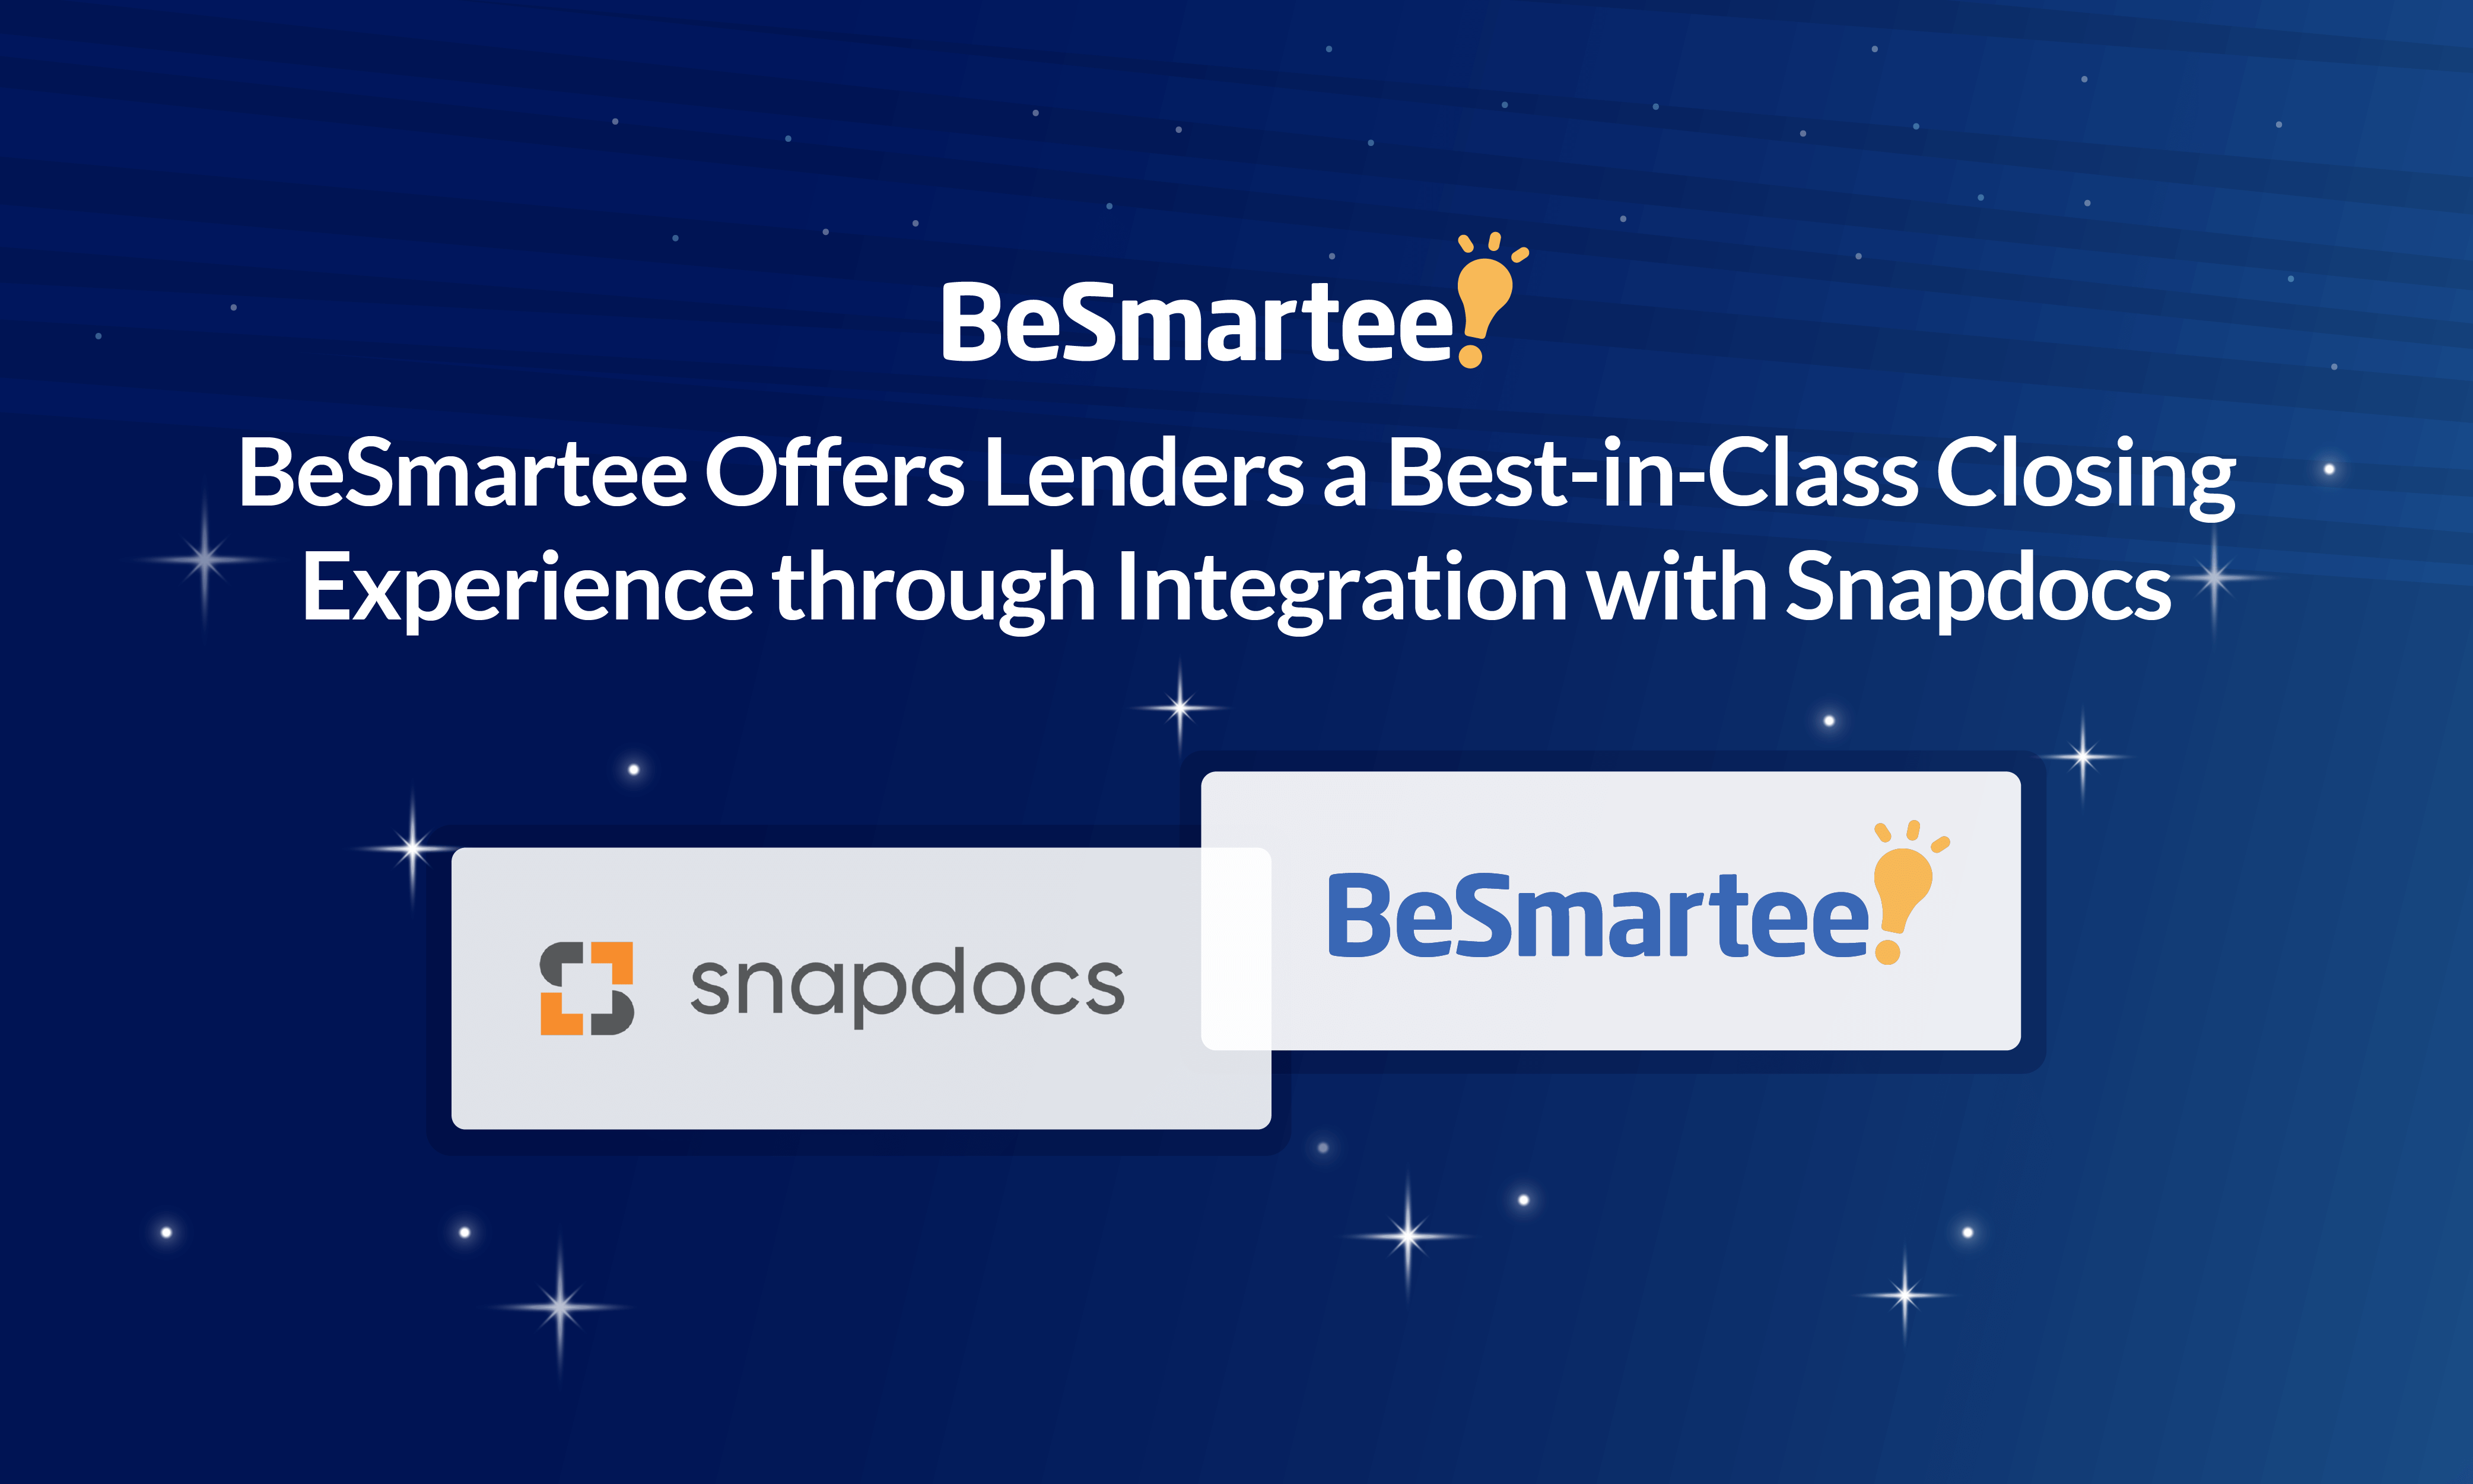 besmartee offers lenders a best-in-class closing experience through integration with snapdocs